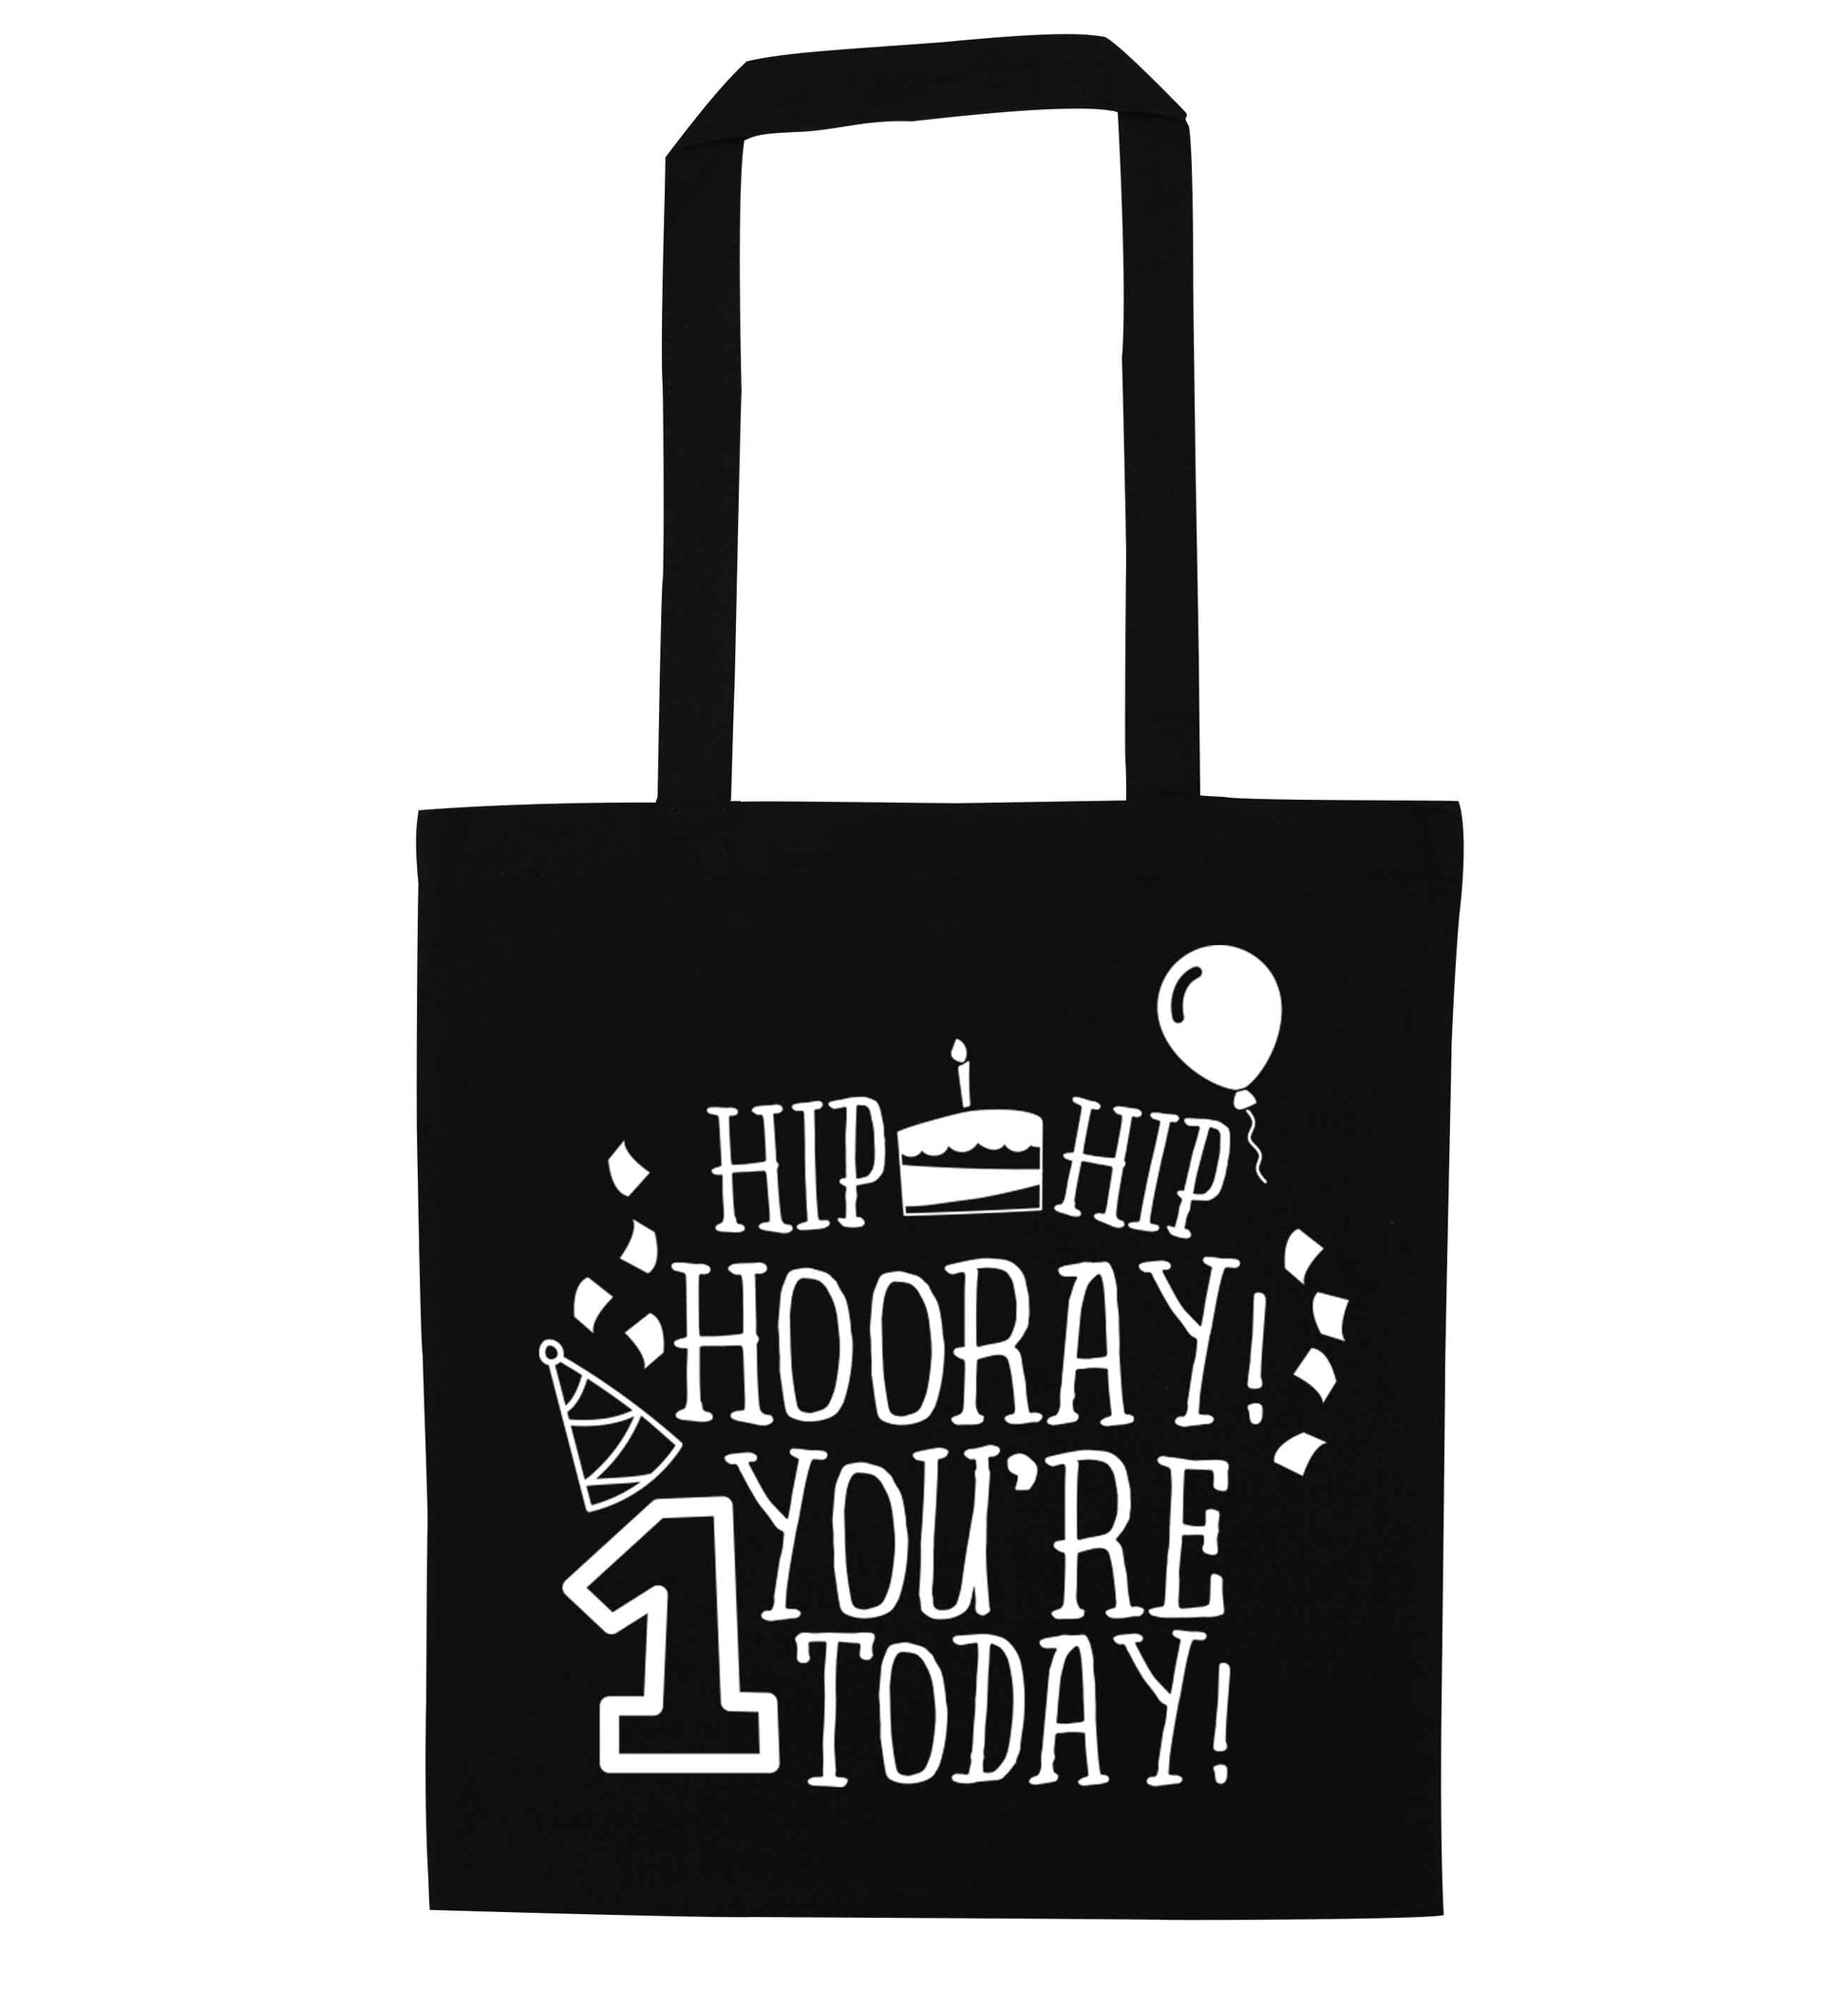 You're one today black tote bag